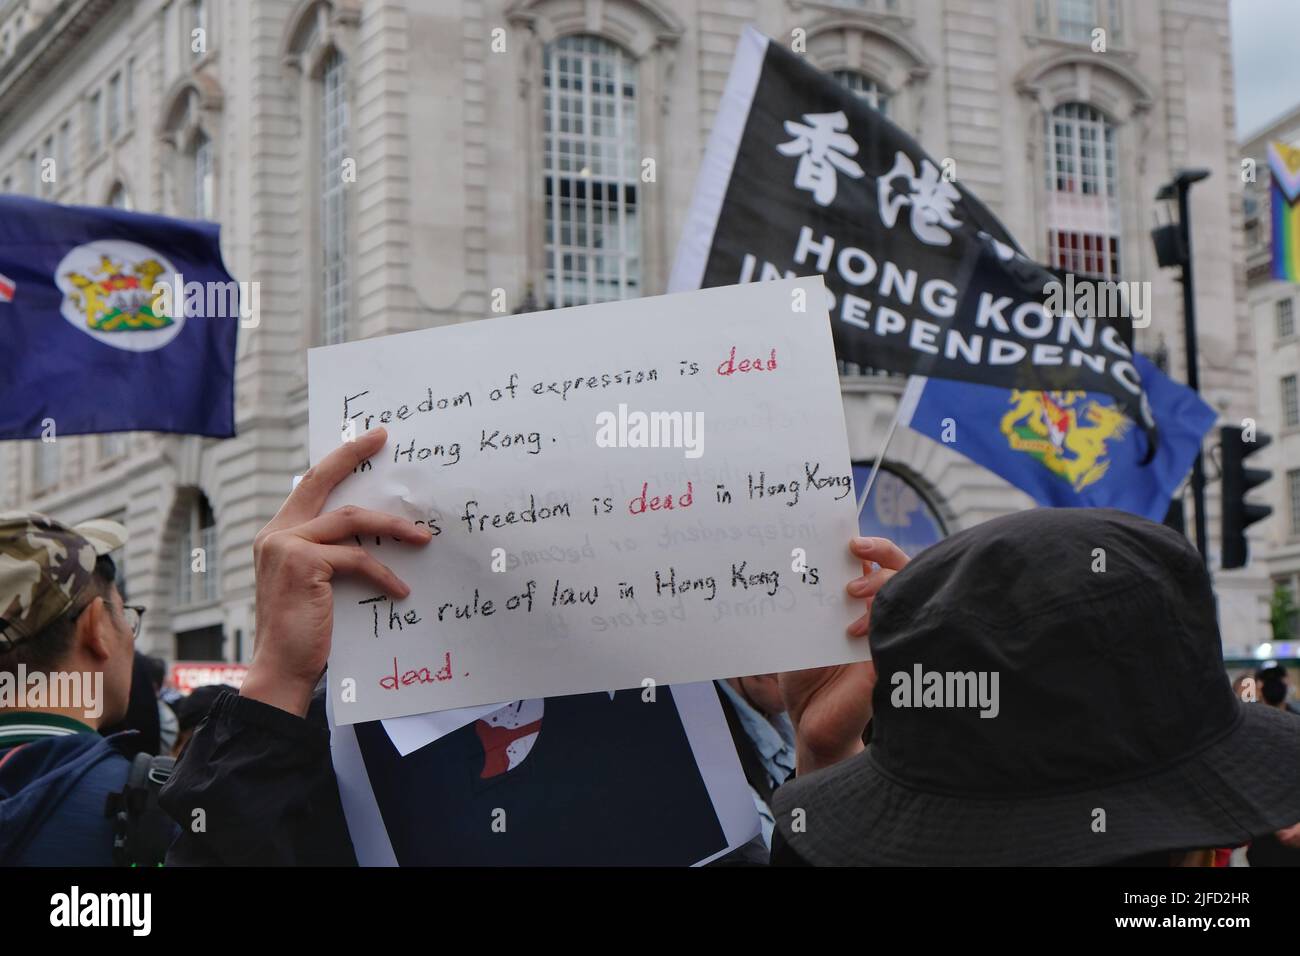 London, UK, 1st July, 2022. Hong Kong pro-democracy activists held a rally outside the Hong Kong Trade & Economic Office on the 25th anniversary of the British handover back to China, when it was agreed that territory would retain civil liberties under the principle of 'one country, two systems', for 50 years after 1997.   Growing concern over the crackdown on protest, closure of several news outlets, and the introduction of the national security law have led to some Western nations' criticism of interference by Beijing authorities. Credit: Eleventh Hour Photography/Alamy Live News Stock Photo